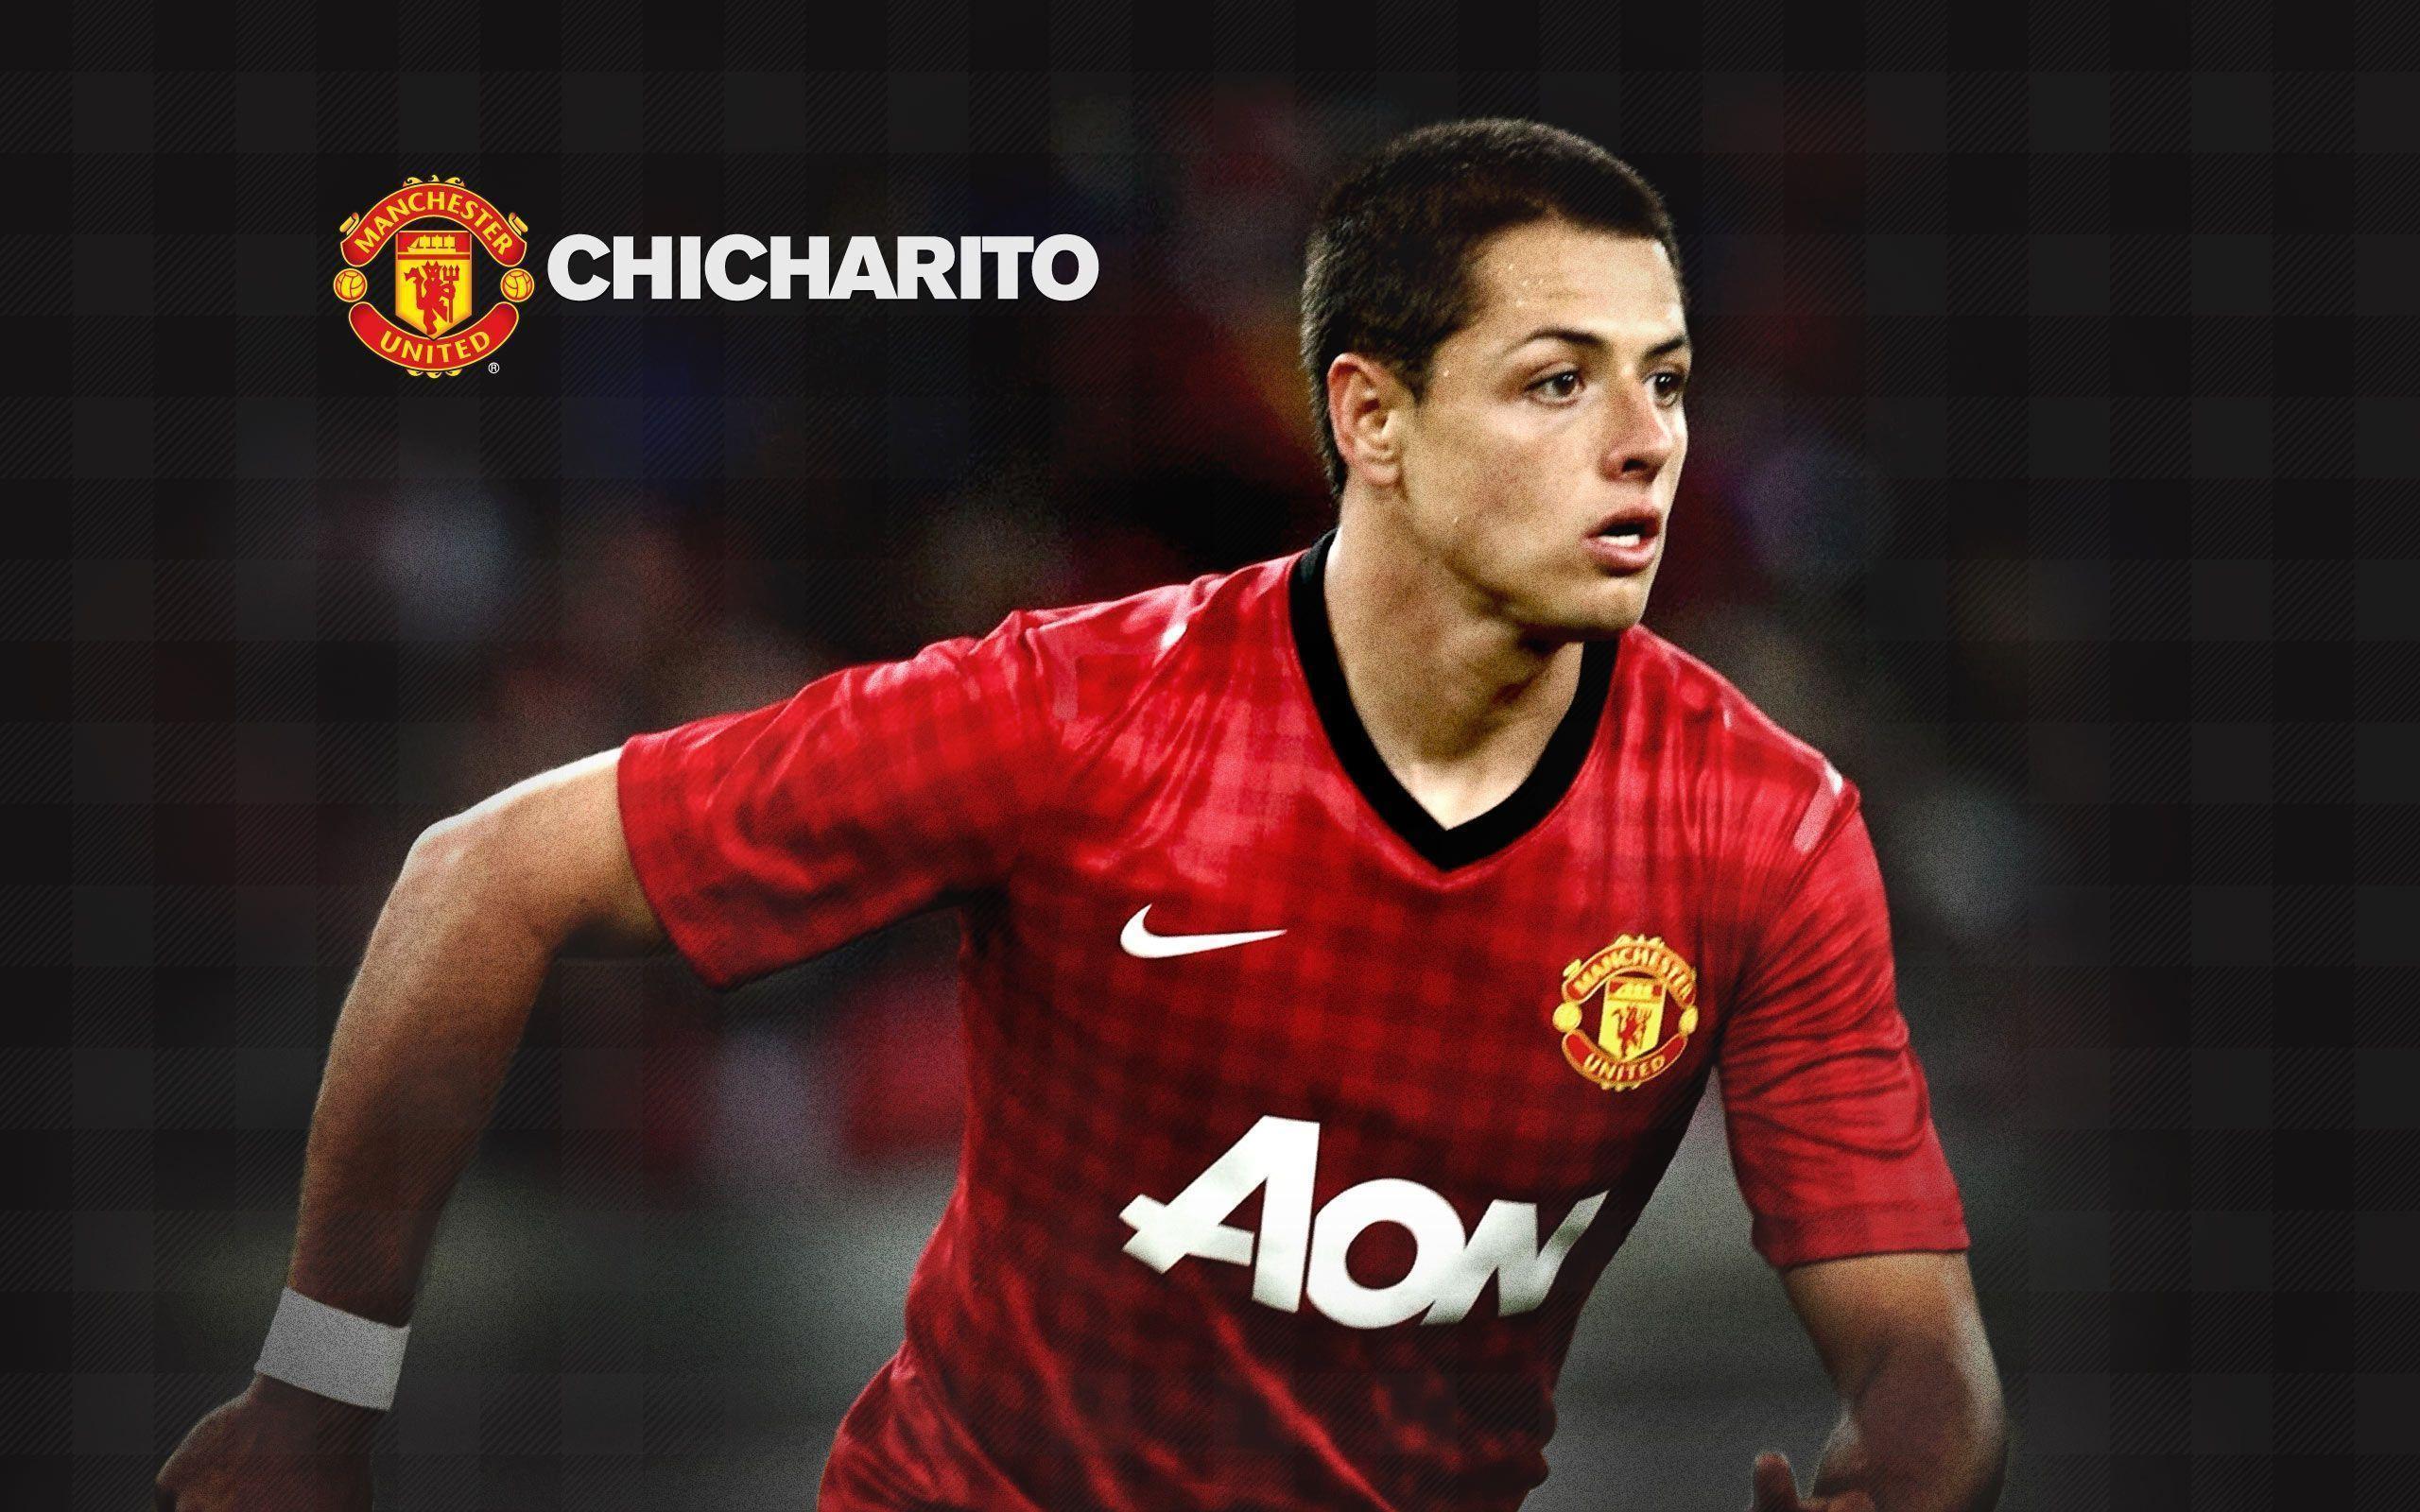 Wallpaper  sports blue footballers Manchester United Chicharito  Javier Hernandez weather 1920x1080  Lucho03  237120  HD Wallpapers   WallHere